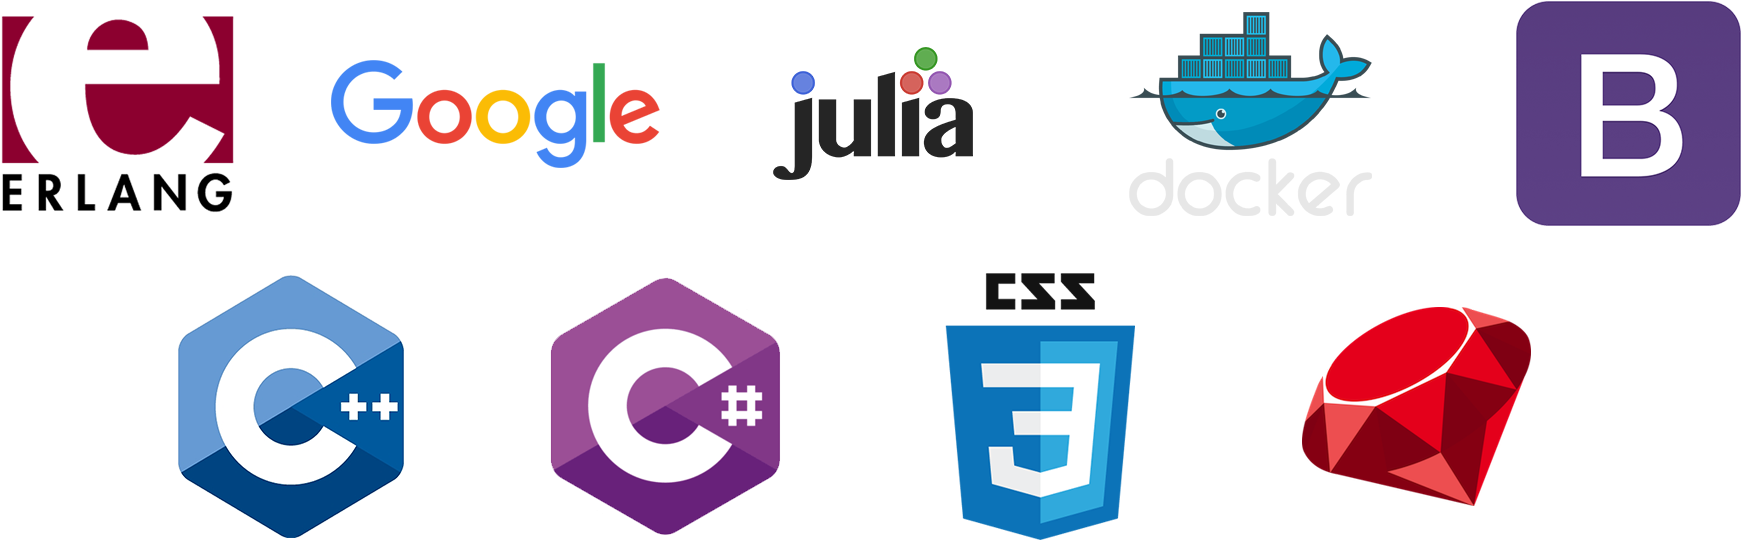 Programming Languages Logo Images Wallpaper Images Android Pc Hd